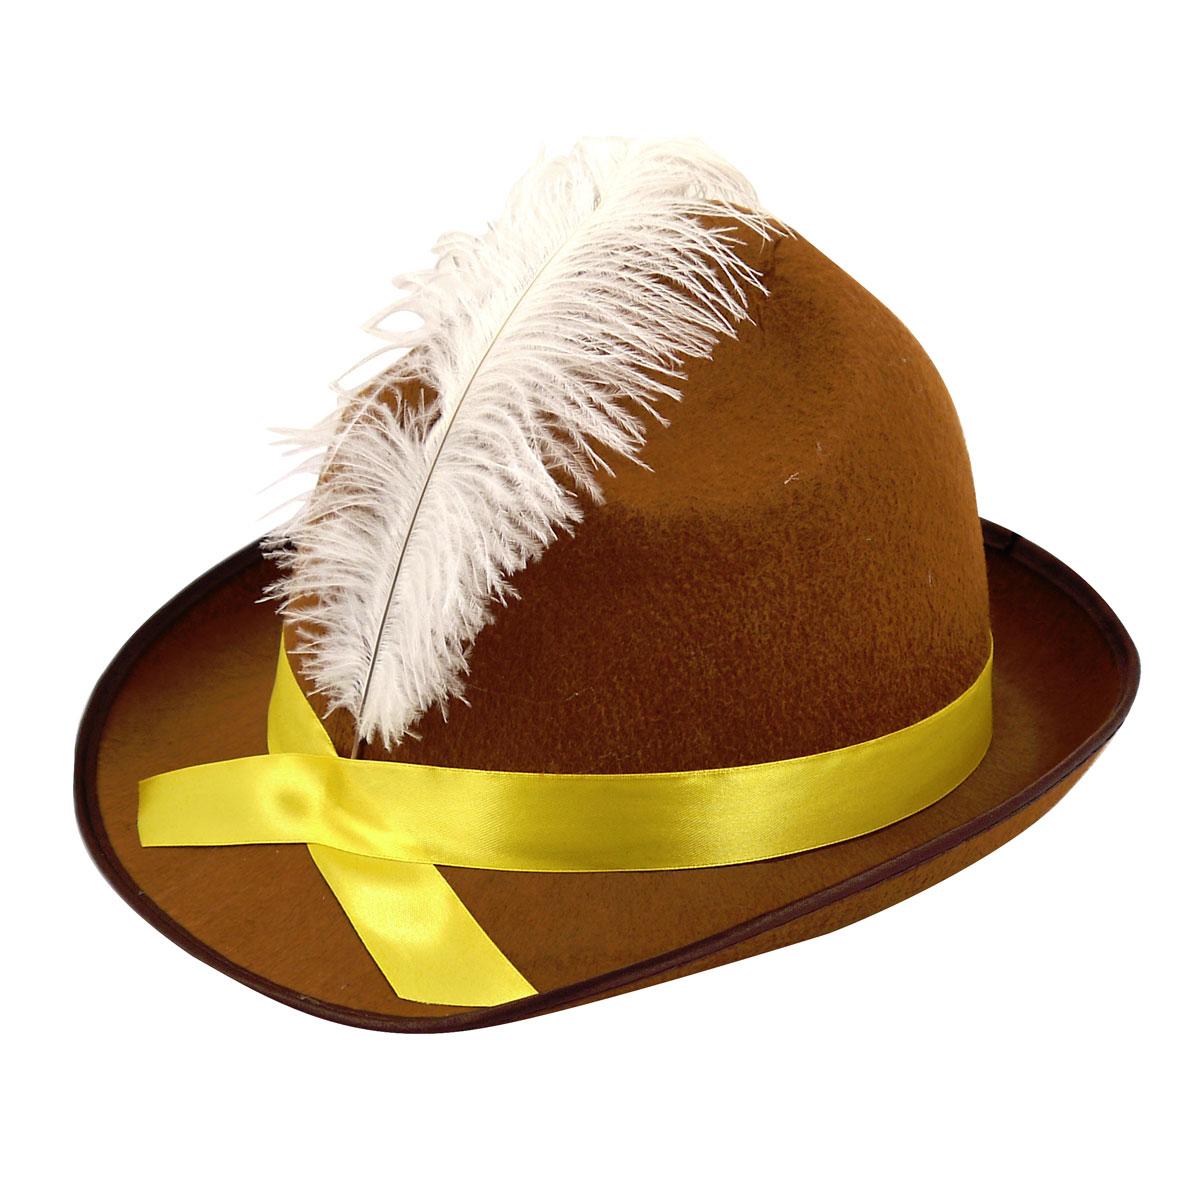 Bavarian Beer Festival Hat with White Feather by Henbrandt H09826 available from a huge collection of Oktoberfest hats here at Karnival Costumes online party shop